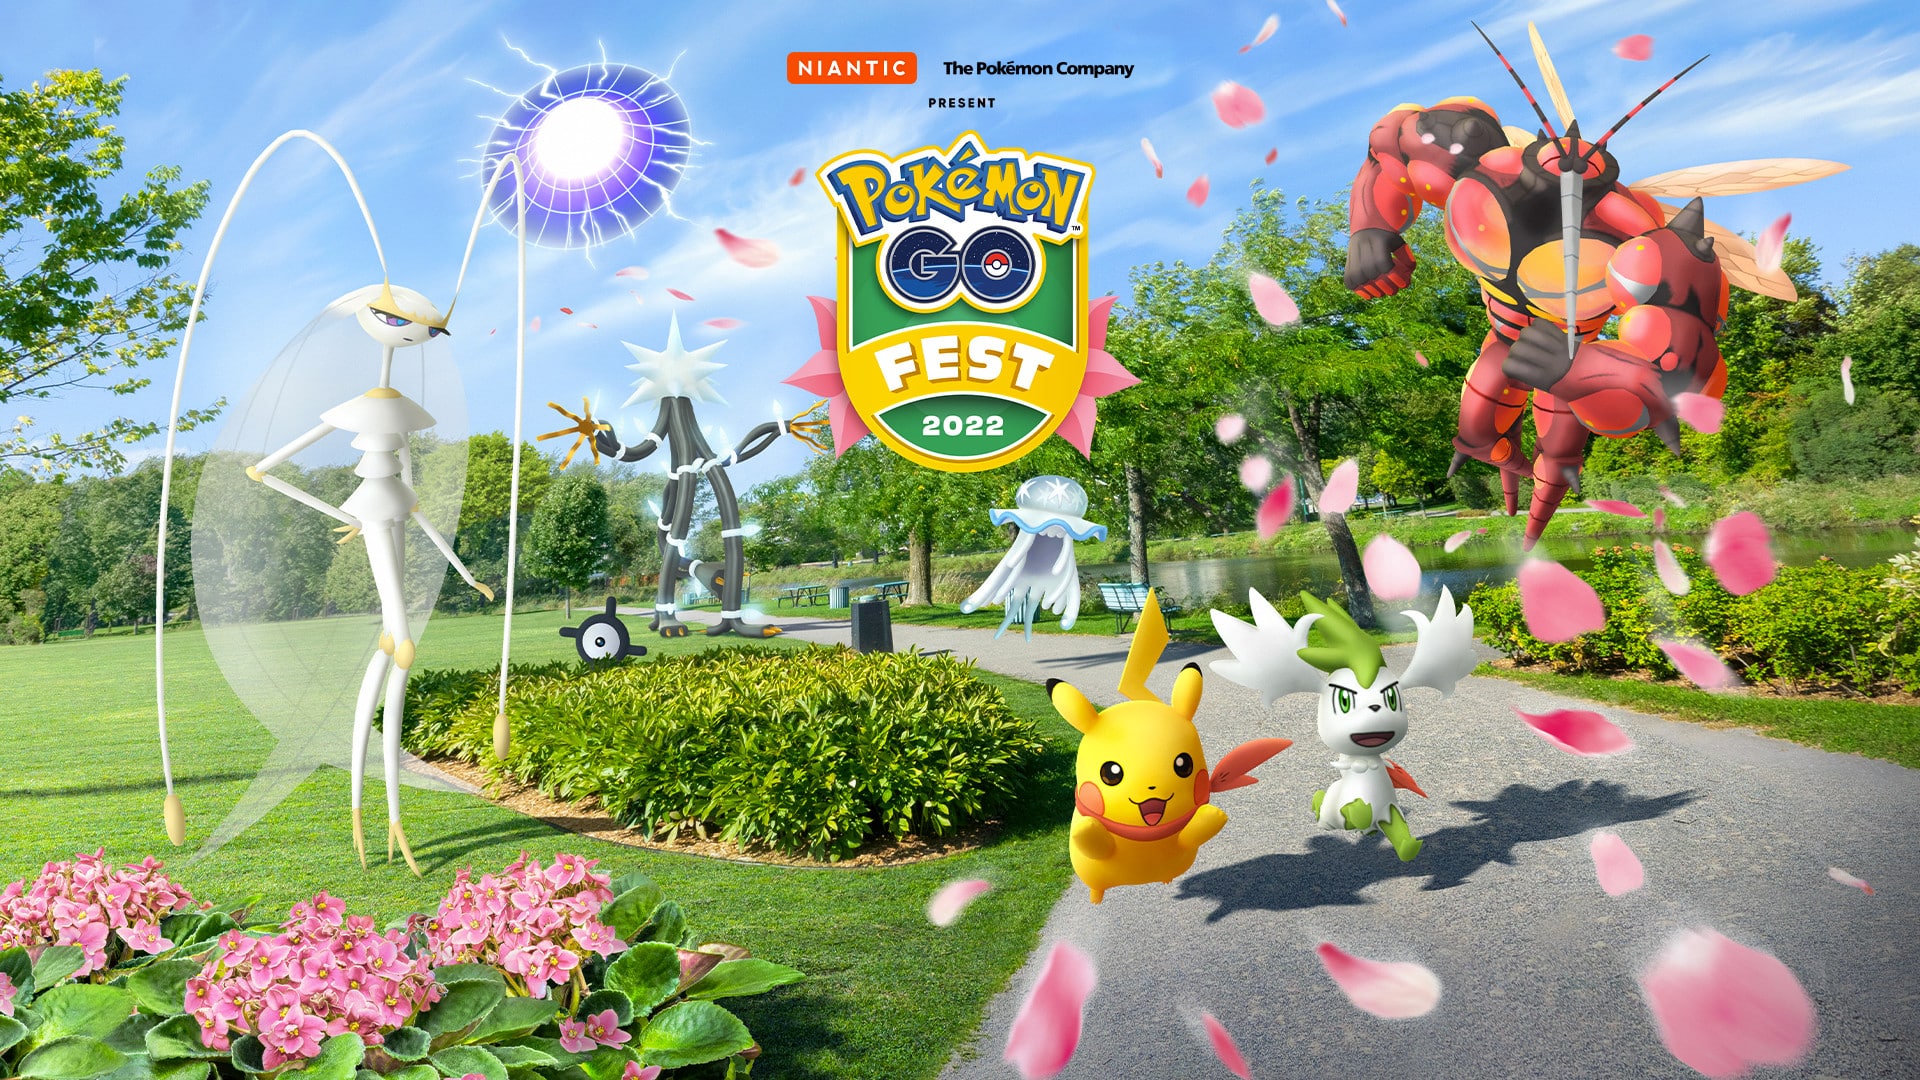 Pokémon GO reveals all the details of the GO Fest Grand Finale - Featuring Ultra Beasts, Habitats and Shaymin